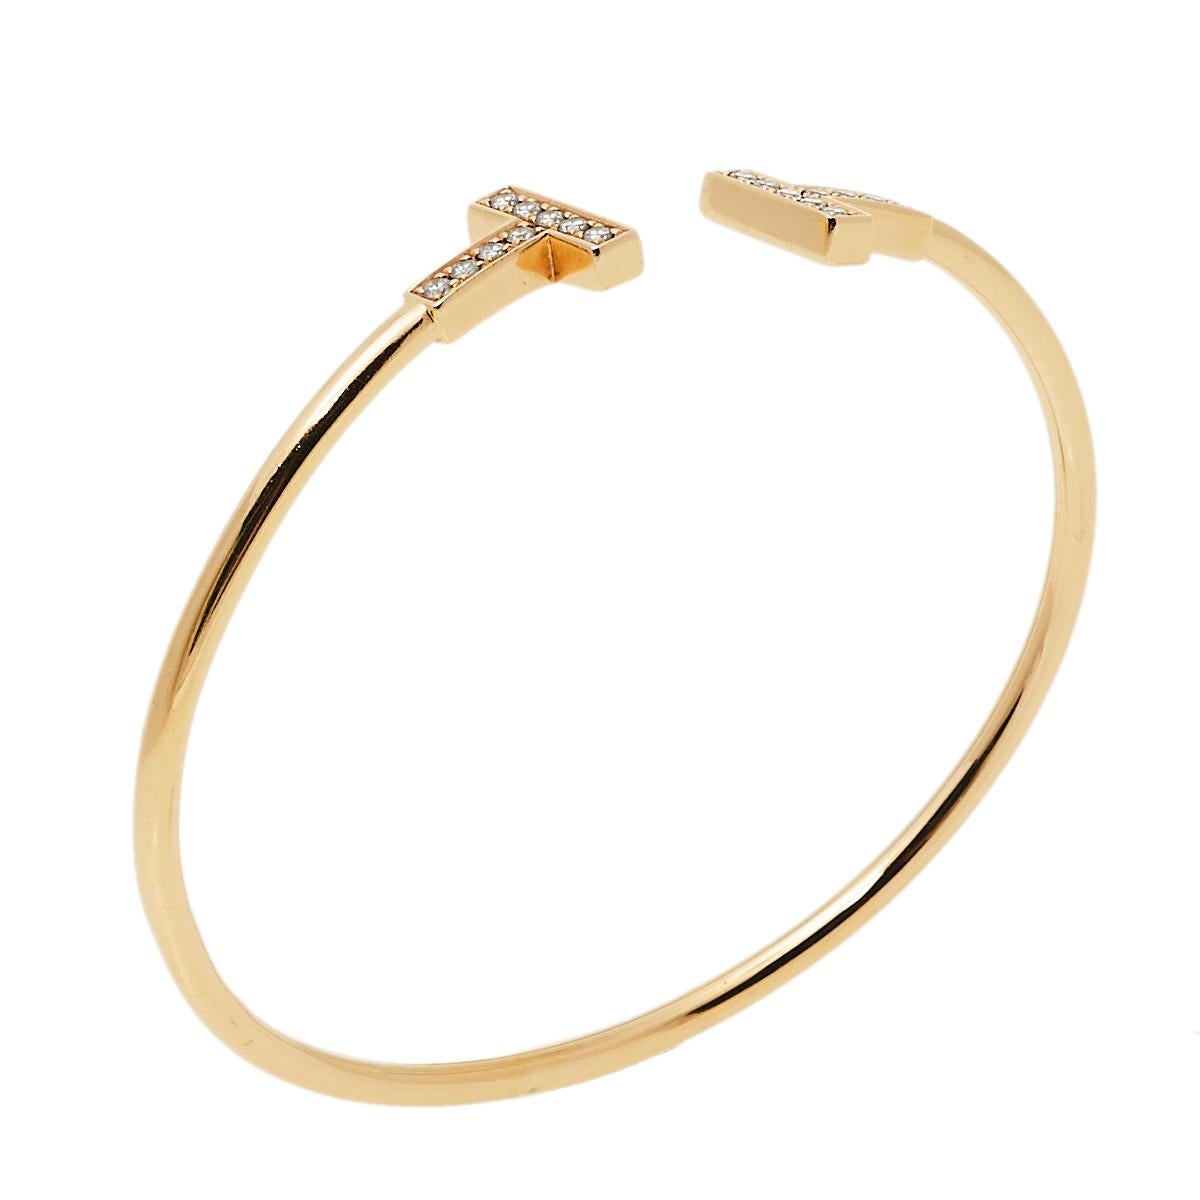 The Tiffany T collection is one of the most popular jewelry lines from Tiffany & Co. Each piece comes with a distinct shape that displays or re-interprets the 'T' symbol. This T Wire bracelet is crafted from 18K rose gold and styled as a wire-like